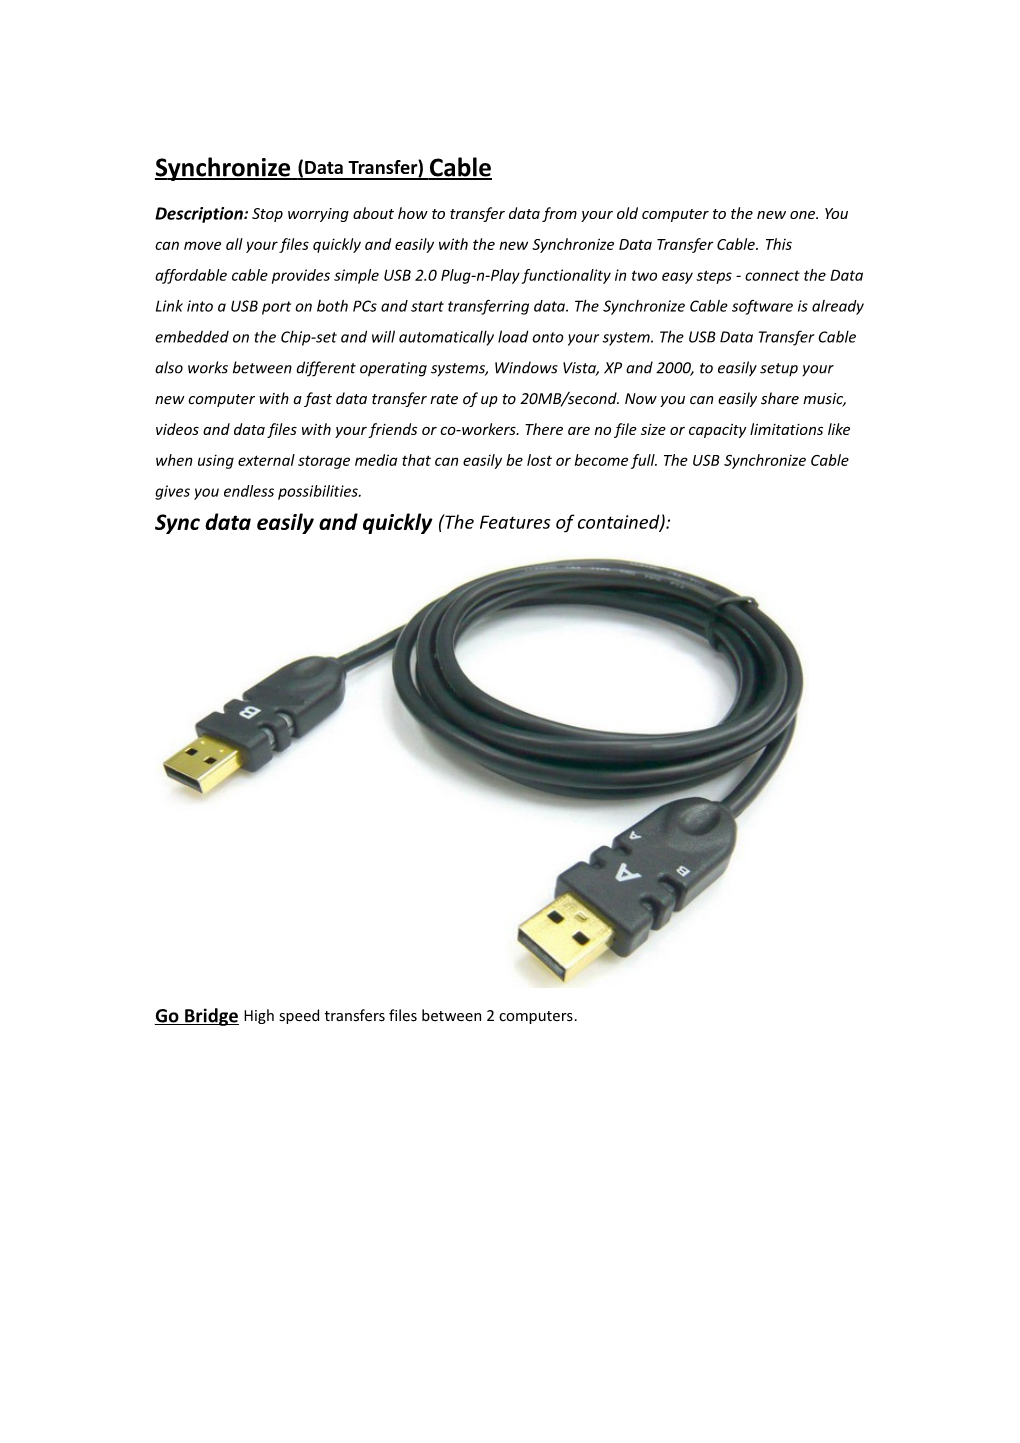 Synchronize (Data Transfer) Cable